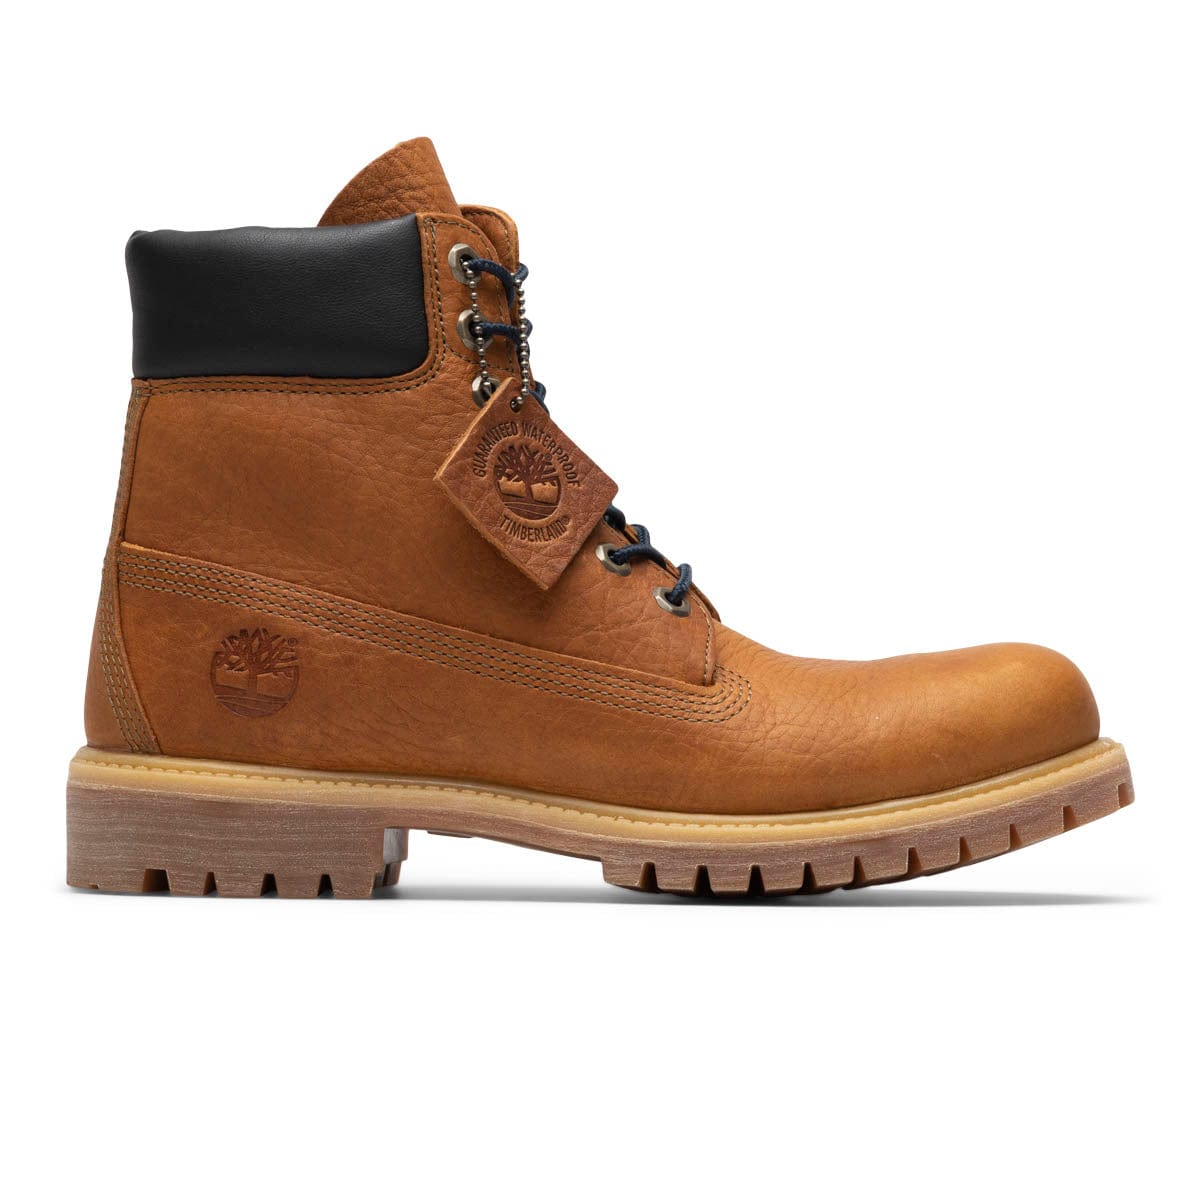 Timberland Boots 6 IN. PREMIUM BOOT